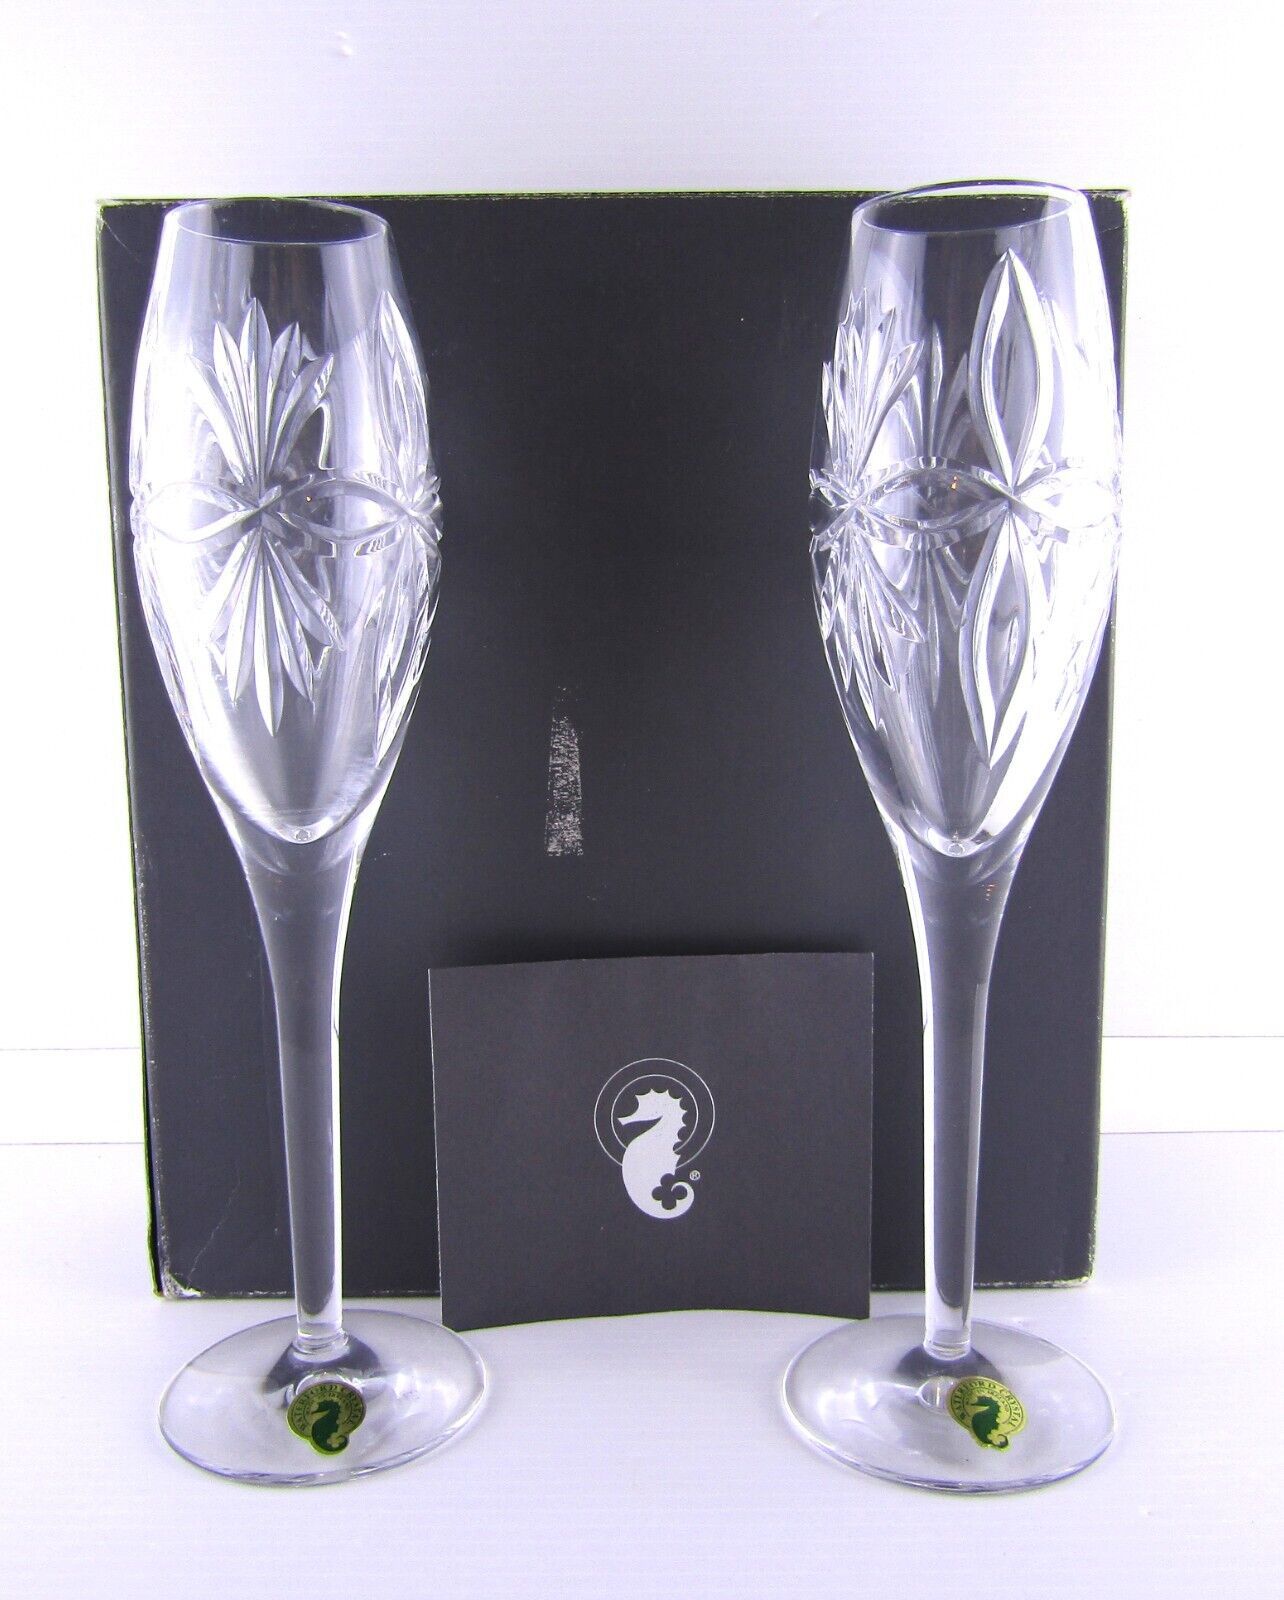 Primary image for Waterford Crystal Champagne Wish Flutes Pair of 2, 10" Tall, Cut Starburst Heavy